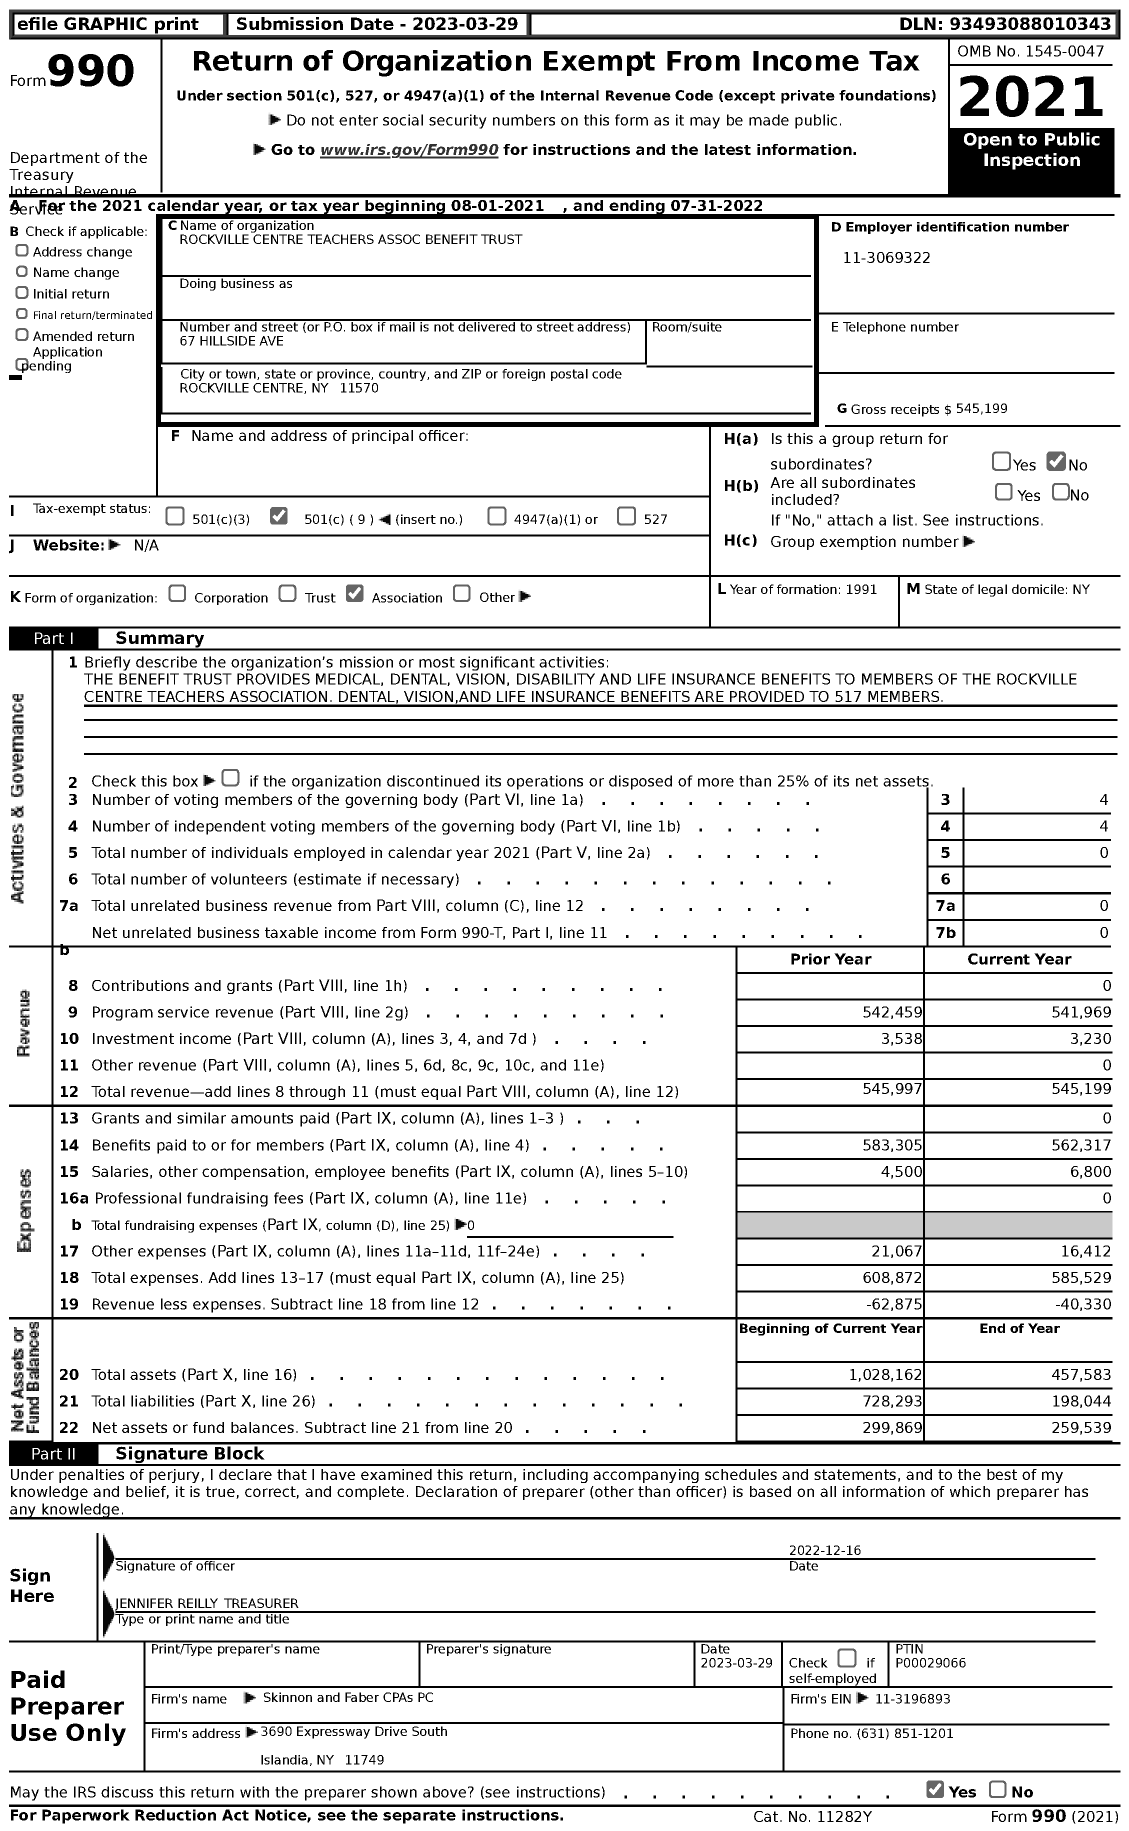 Image of first page of 2021 Form 990 for Rockville Centre Teachers Association Benefit Trust